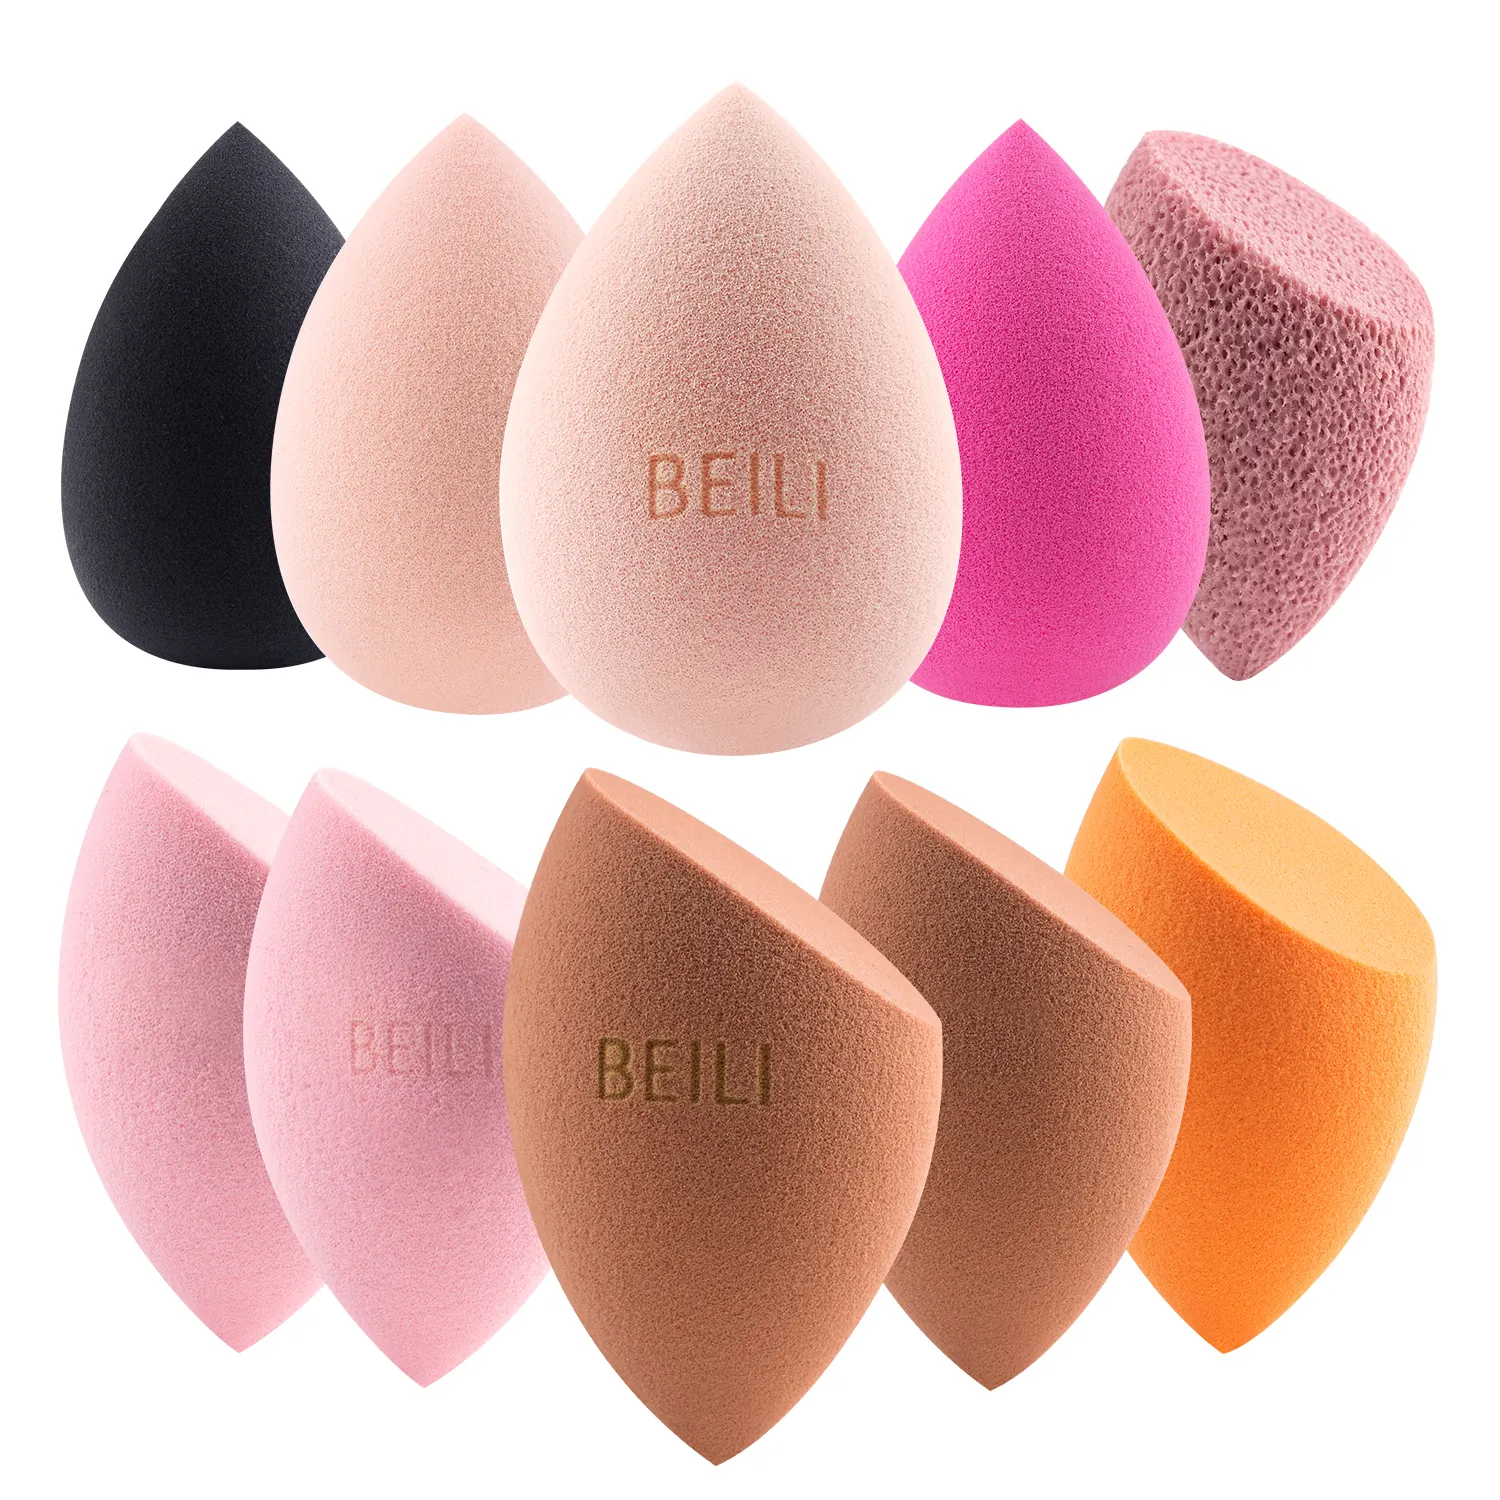 BEILI Beauty Egg Cosmetic Blender Customize Make Up Sponge Private Label Latex Free Makeup Sponge beauty accessories